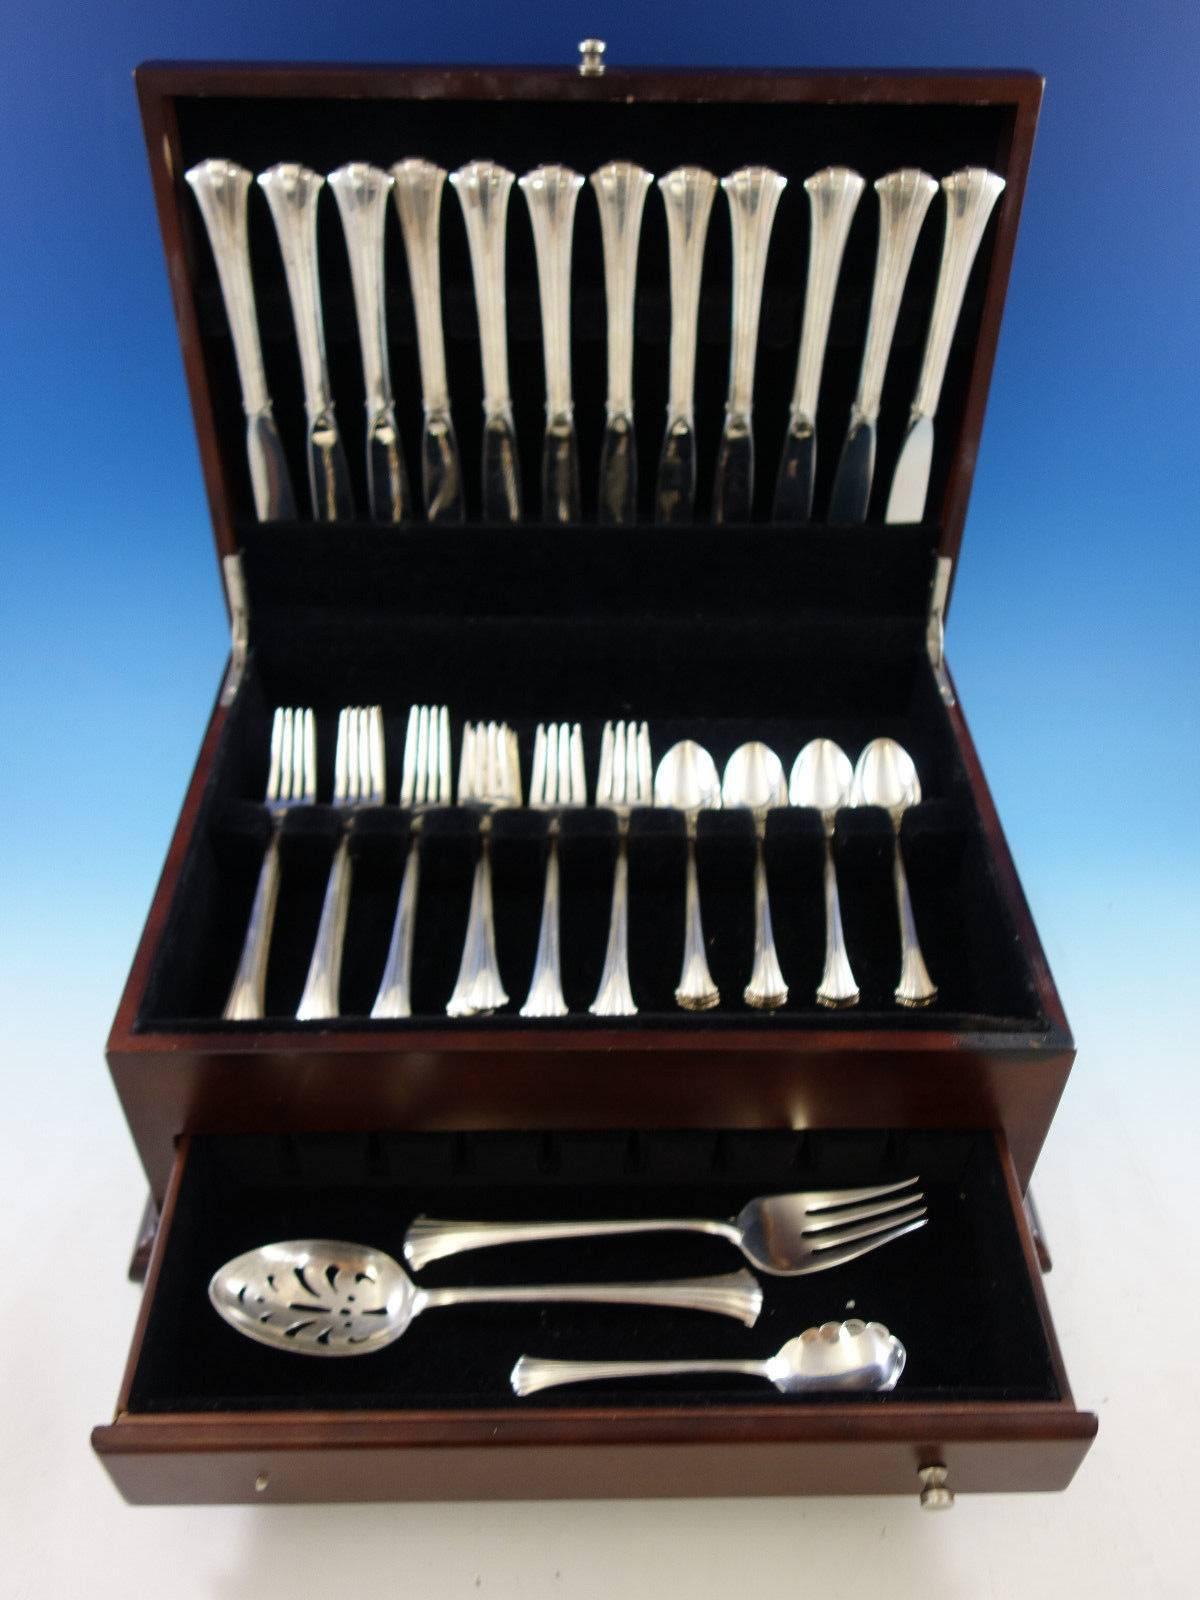 Newport scroll by Gorham sterling silver flatware set, 51 pieces. This set includes: 

12 place size knives, 9 1/8